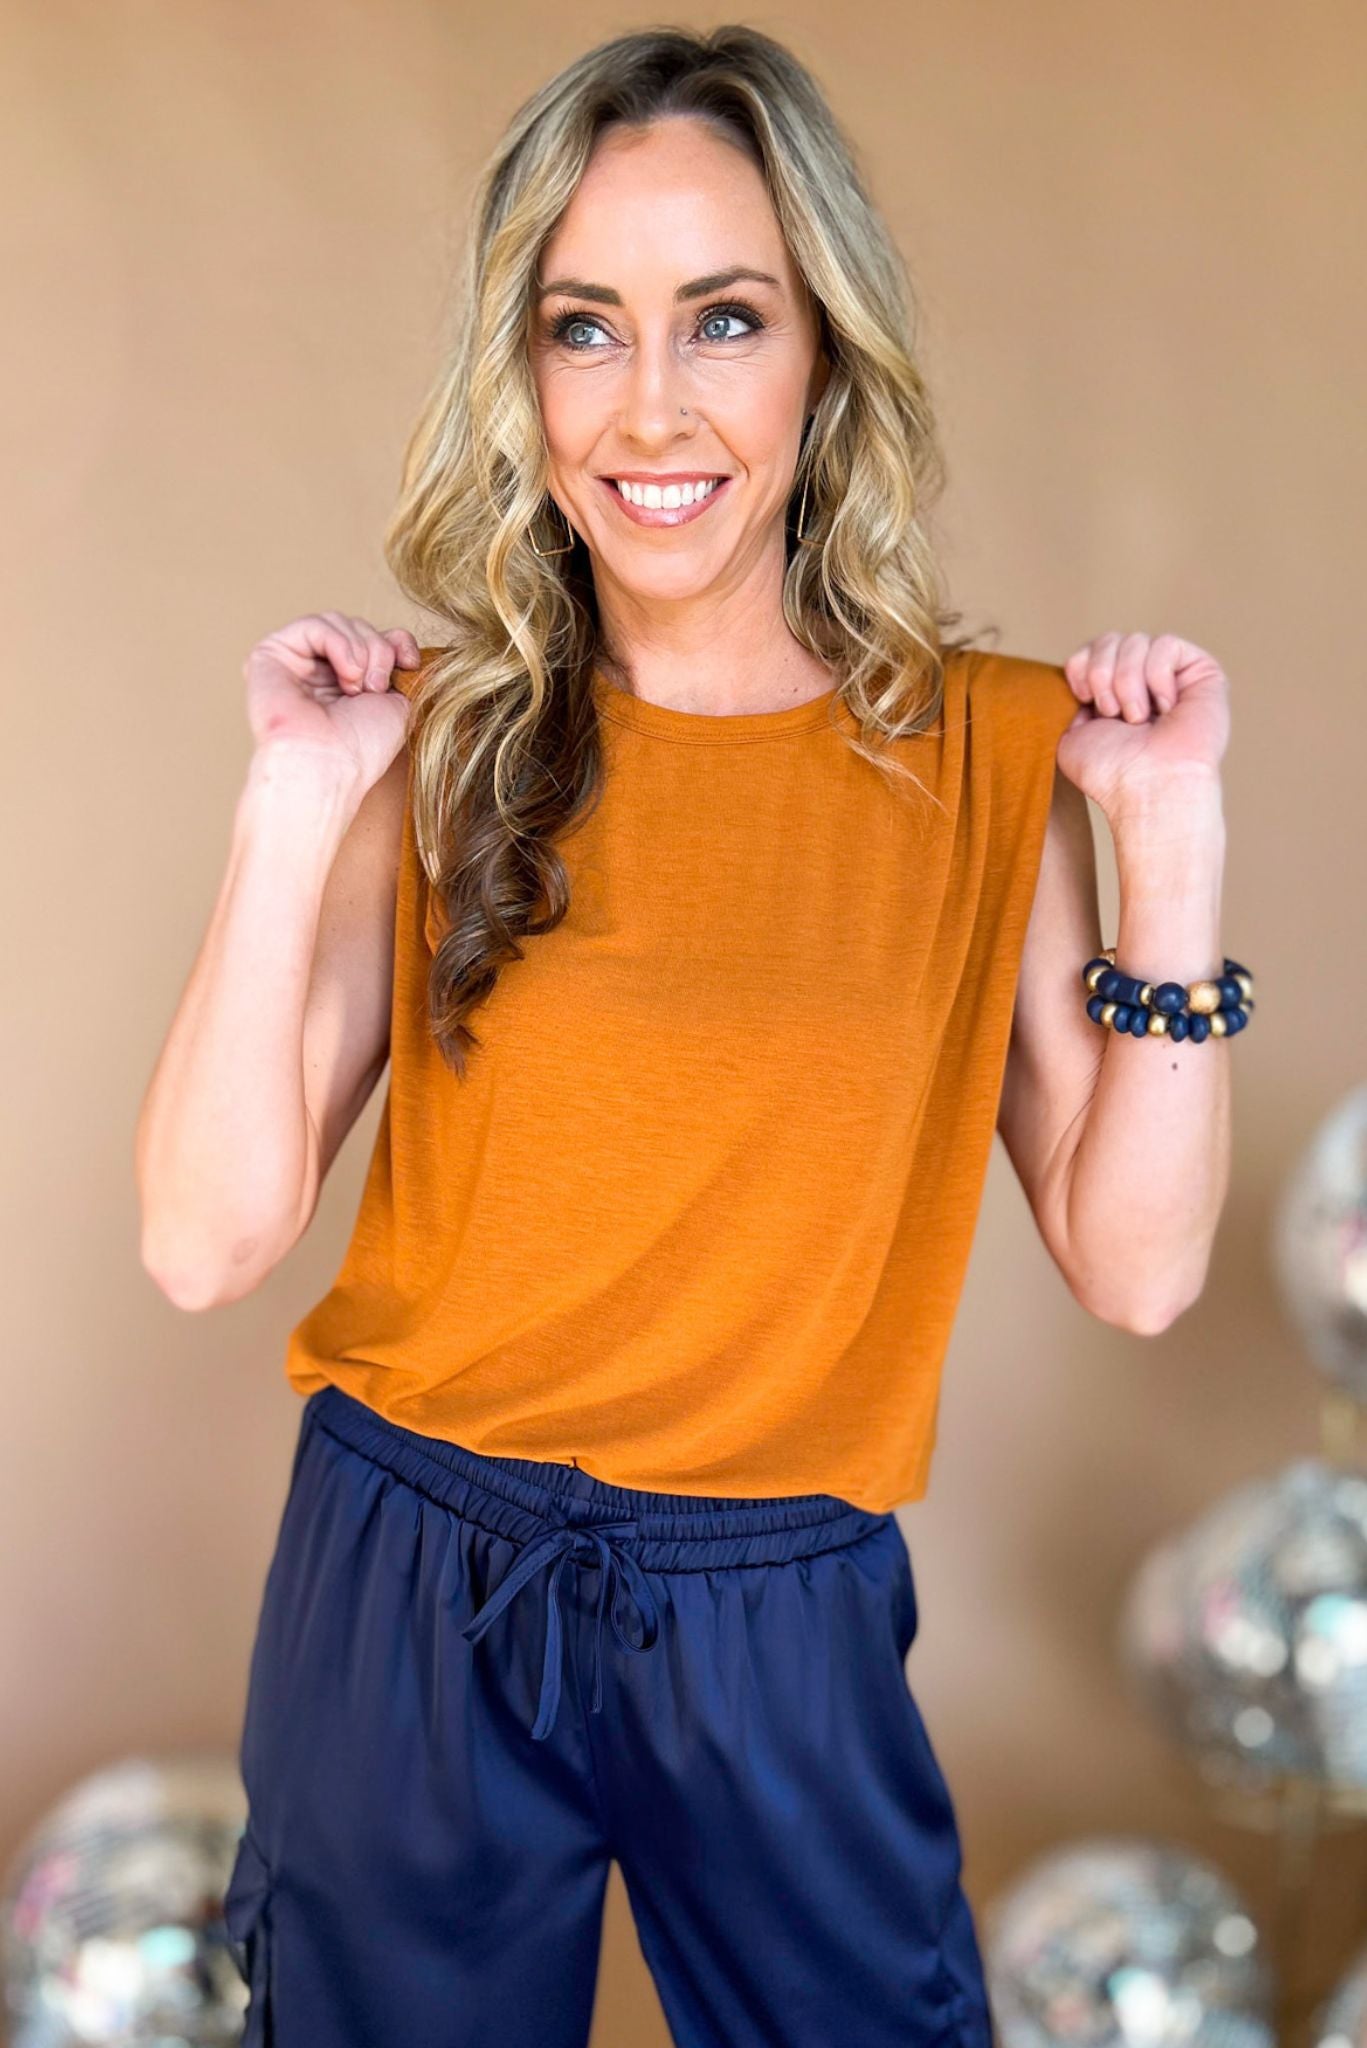 toffee Round Neck Shoulder Pad Sleeveless Top, spring fashion, work to weekend, shoulder pad detail, elevated look, mom style, shop style your senses by mallory fitzsimmons